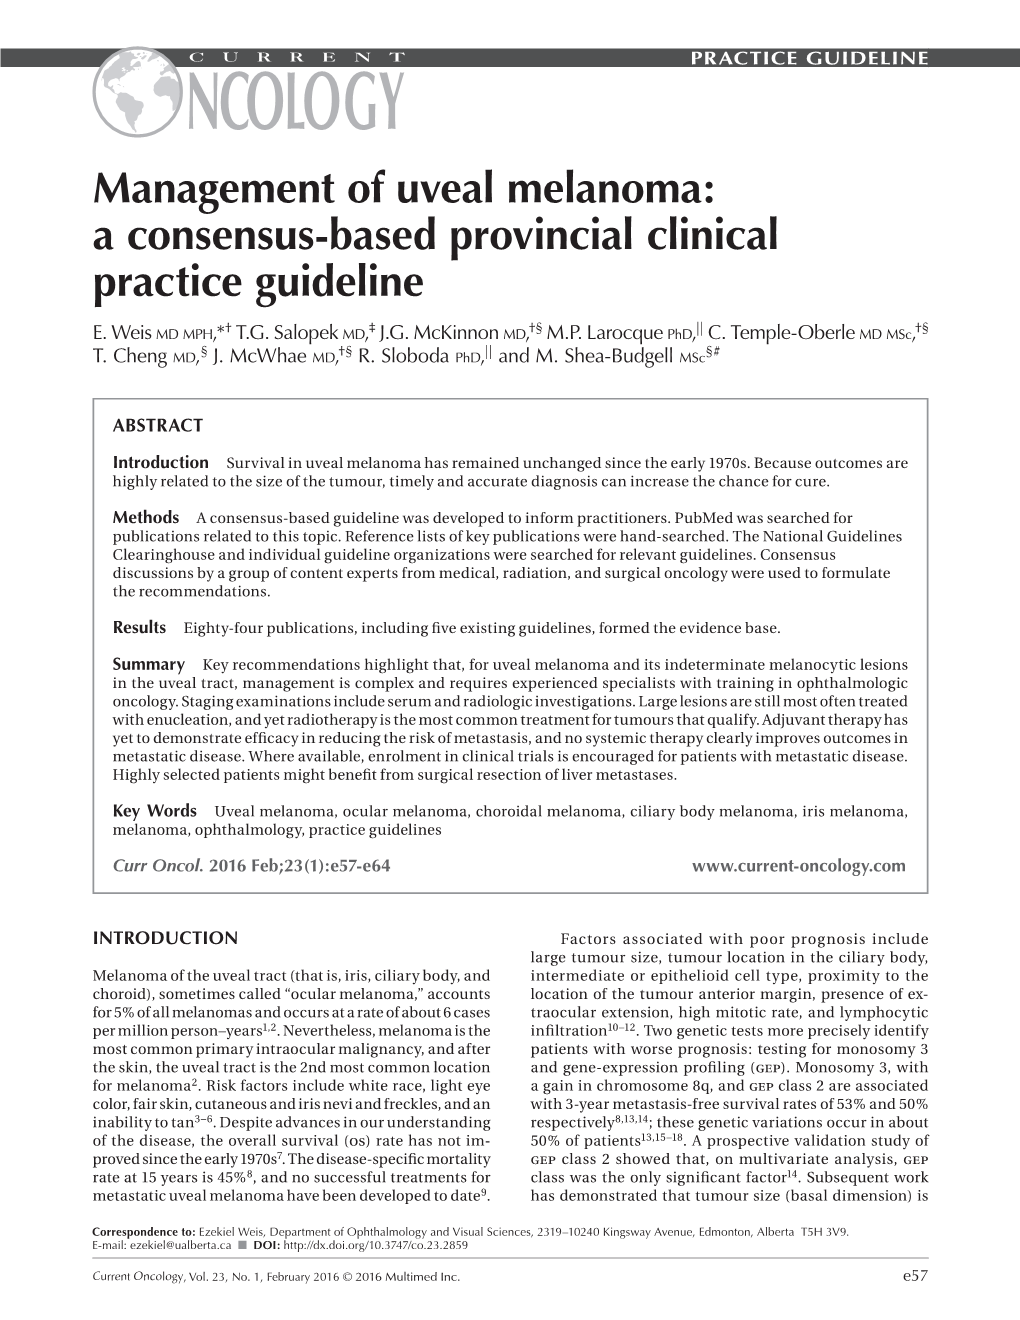 Management of Uveal Melanoma: a Consensus-Based Provincial Clinical Practice Guideline